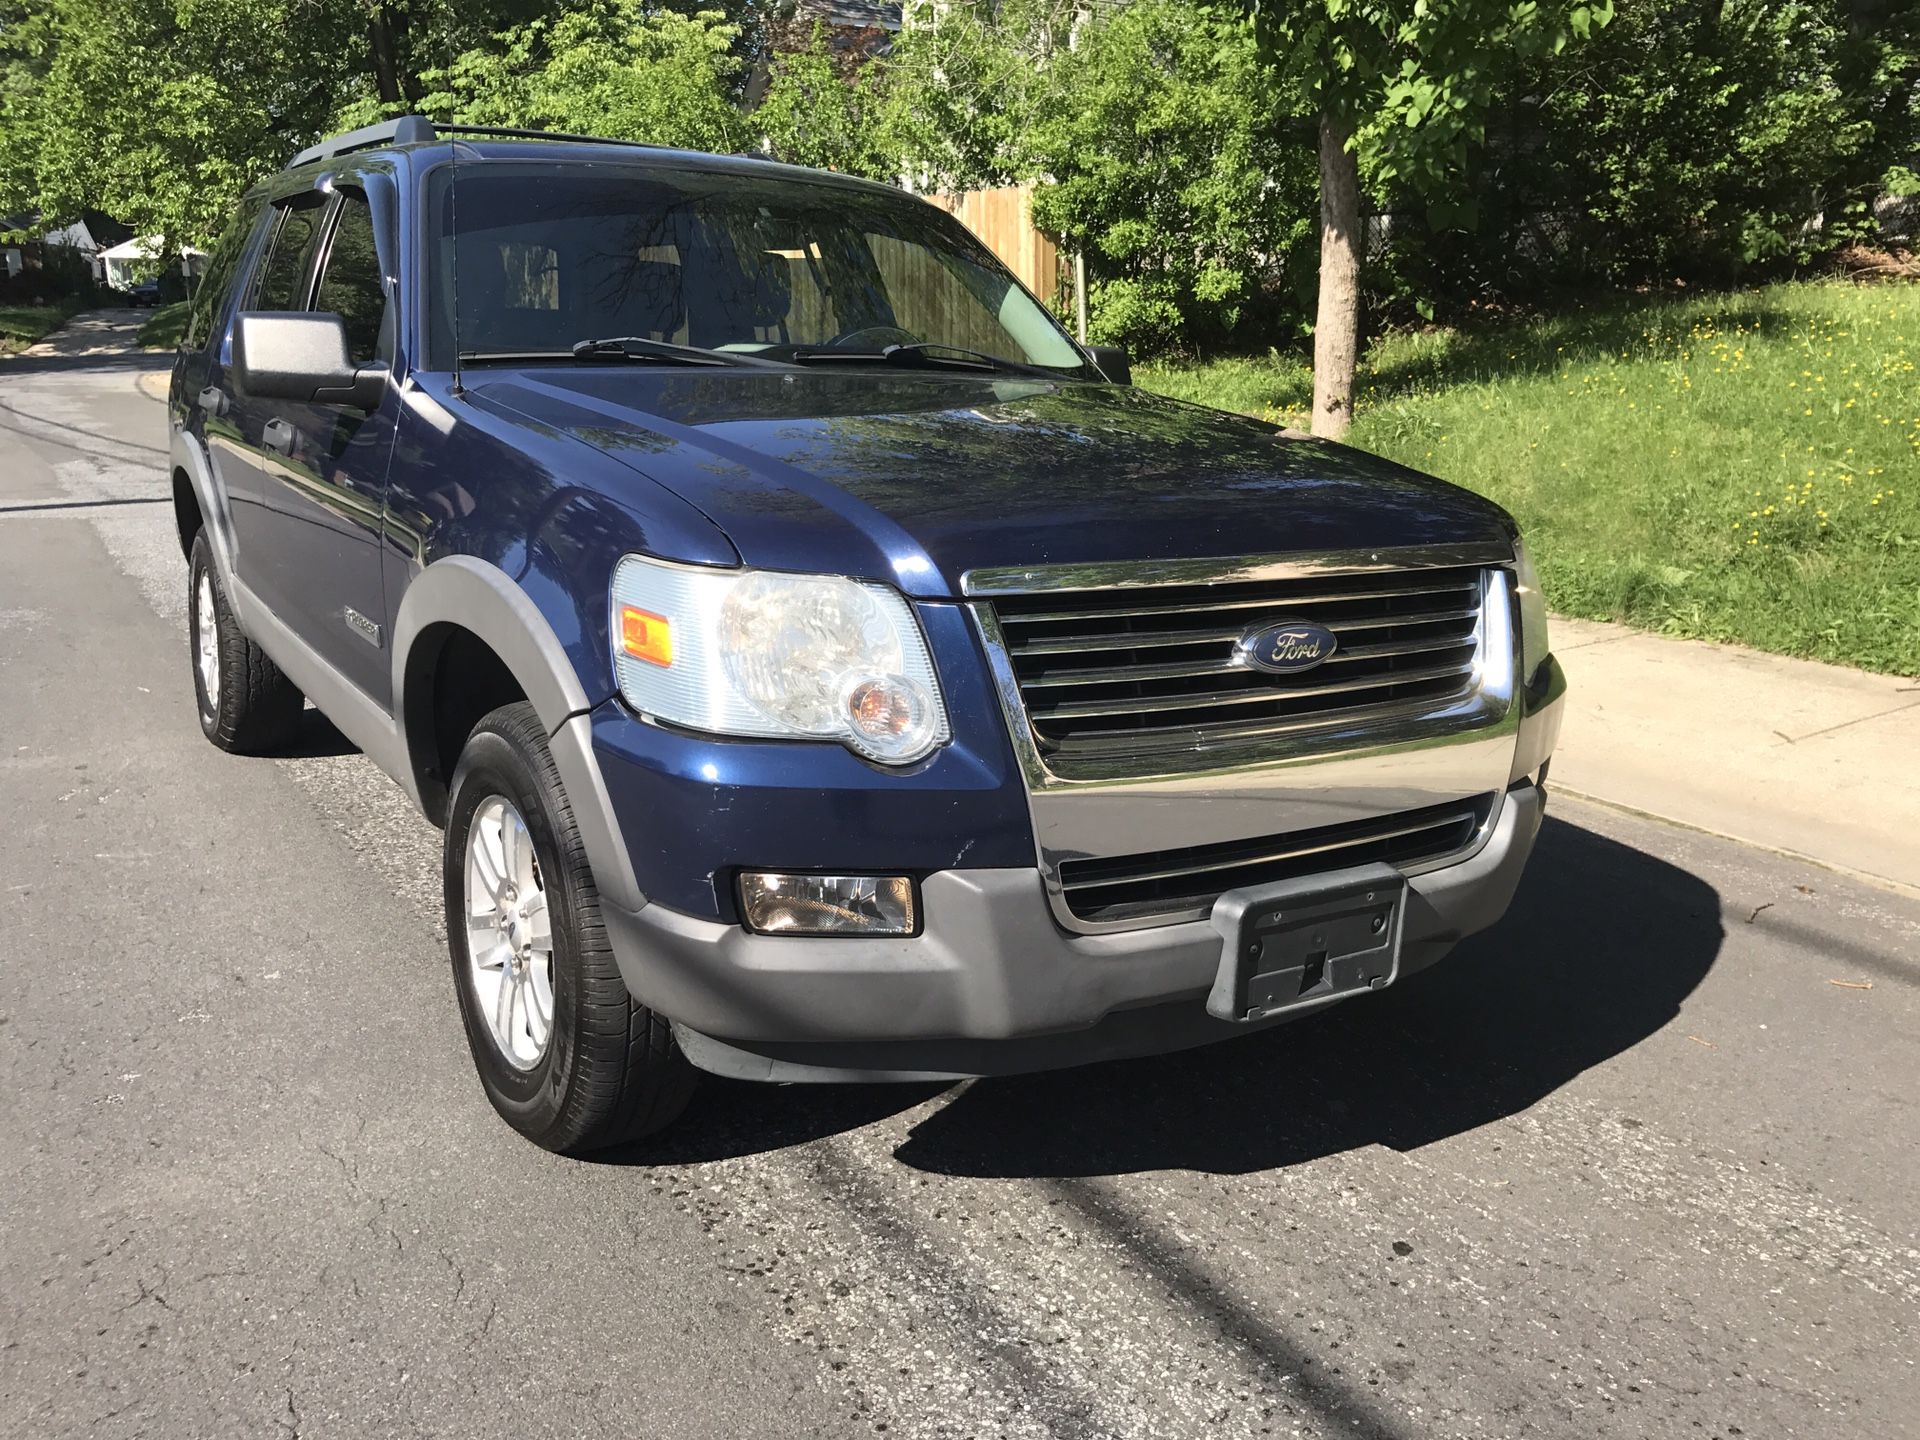 $2890 Firm price !!! 2006 Ford Explorer 4x4 Cold AC. CHEAP !!!